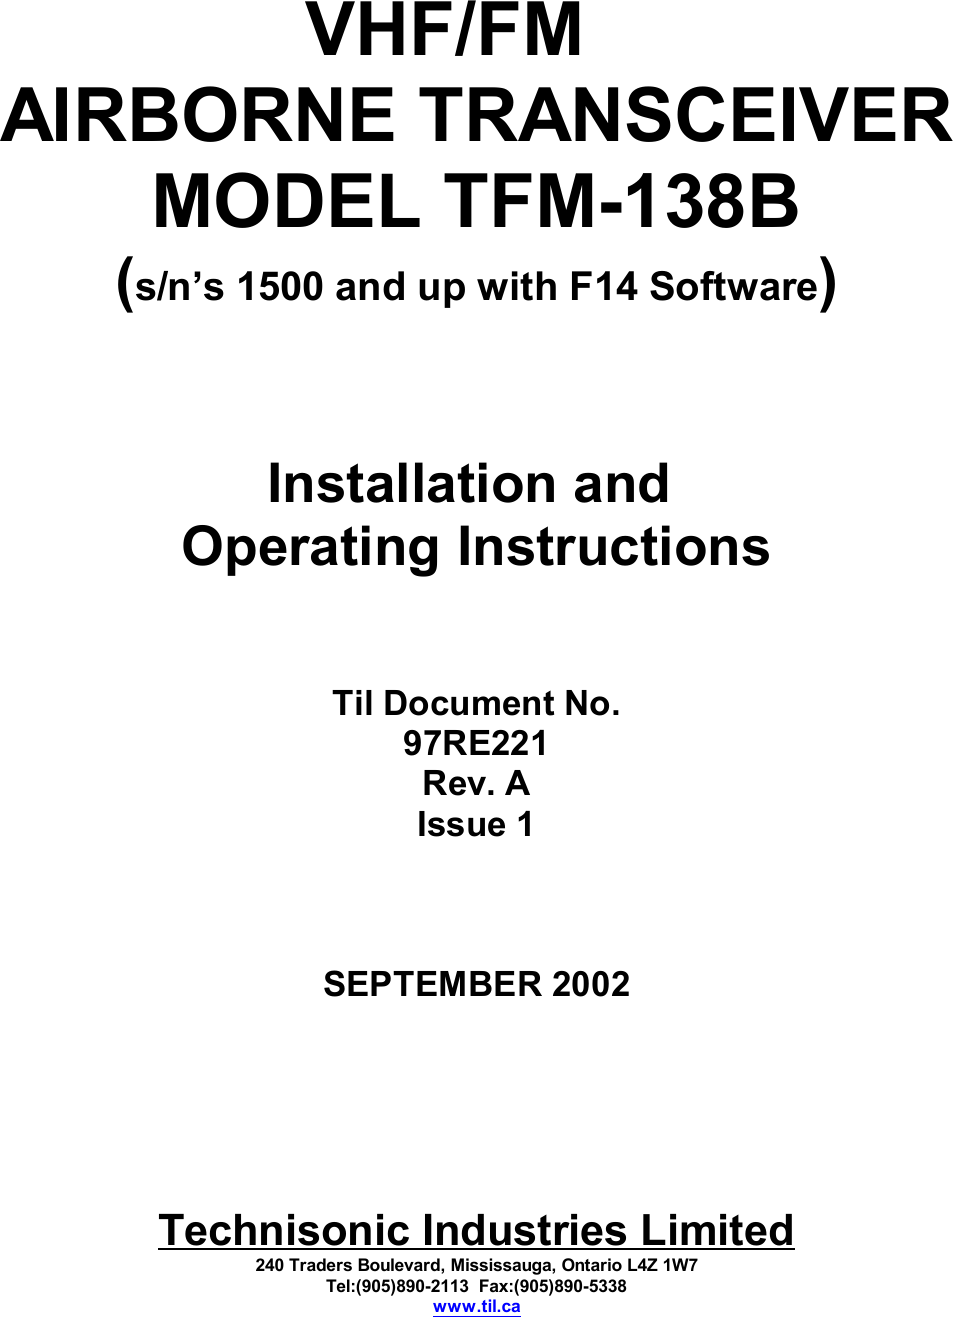 VHF/FM   AIRBORNE TRANSCEIVERMODEL TFM-138B(s/n’s 1500 and up with F14 Software)Installation and Operating InstructionsTil Document No.97RE221Rev. AIssue 1SEPTEMBER 2002Technisonic Industries Limited240 Traders Boulevard, Mississauga, Ontario L4Z 1W7Tel:(905)890-2113  Fax:(905)890-5338www.til.ca